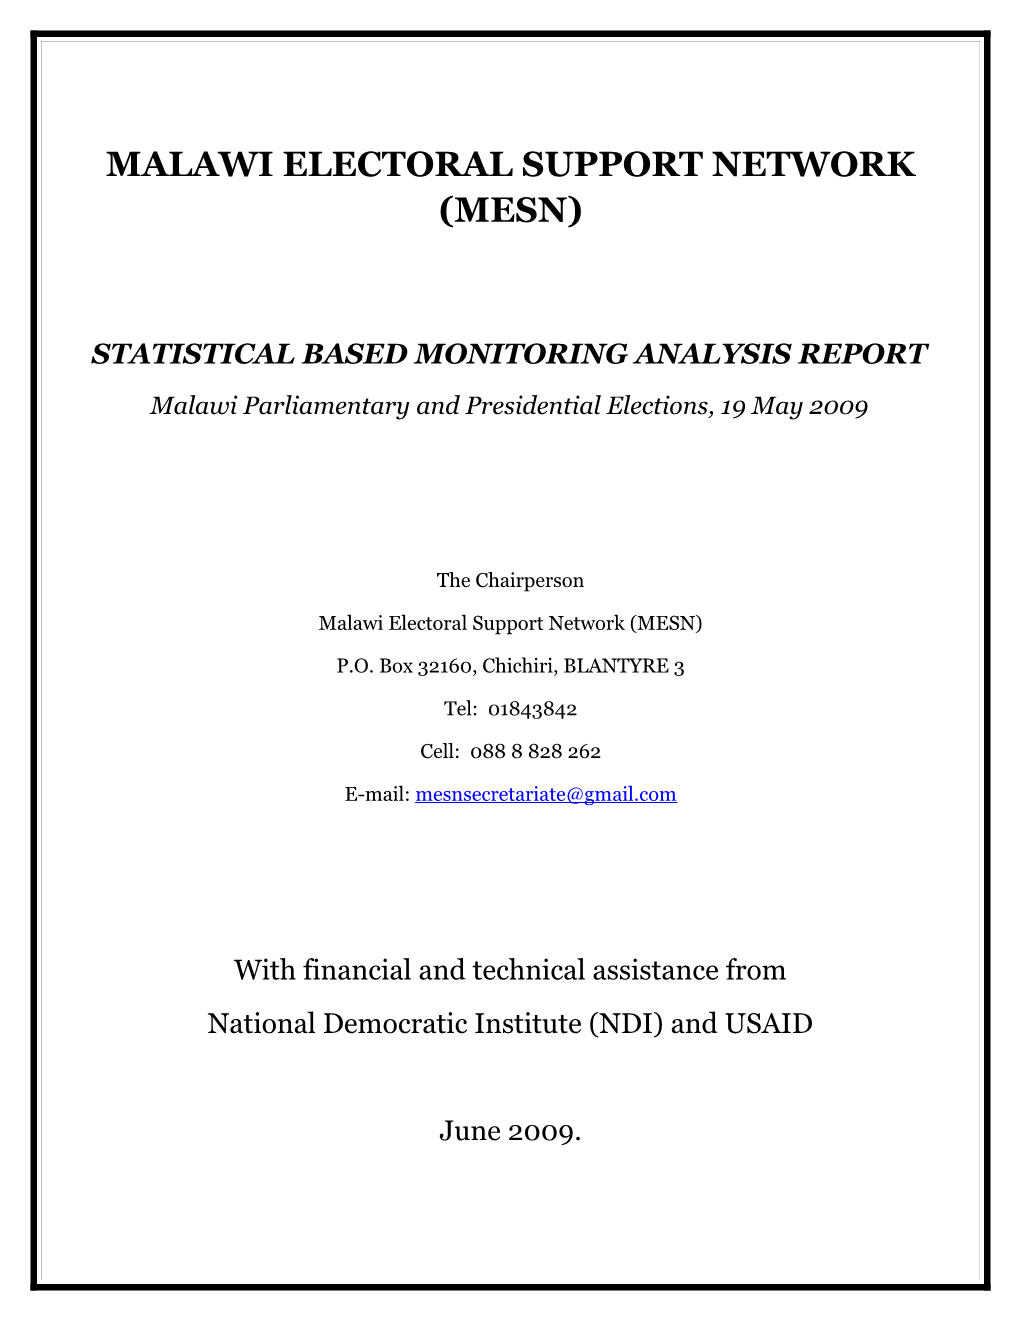 Malawi Election Support Network (MESN)